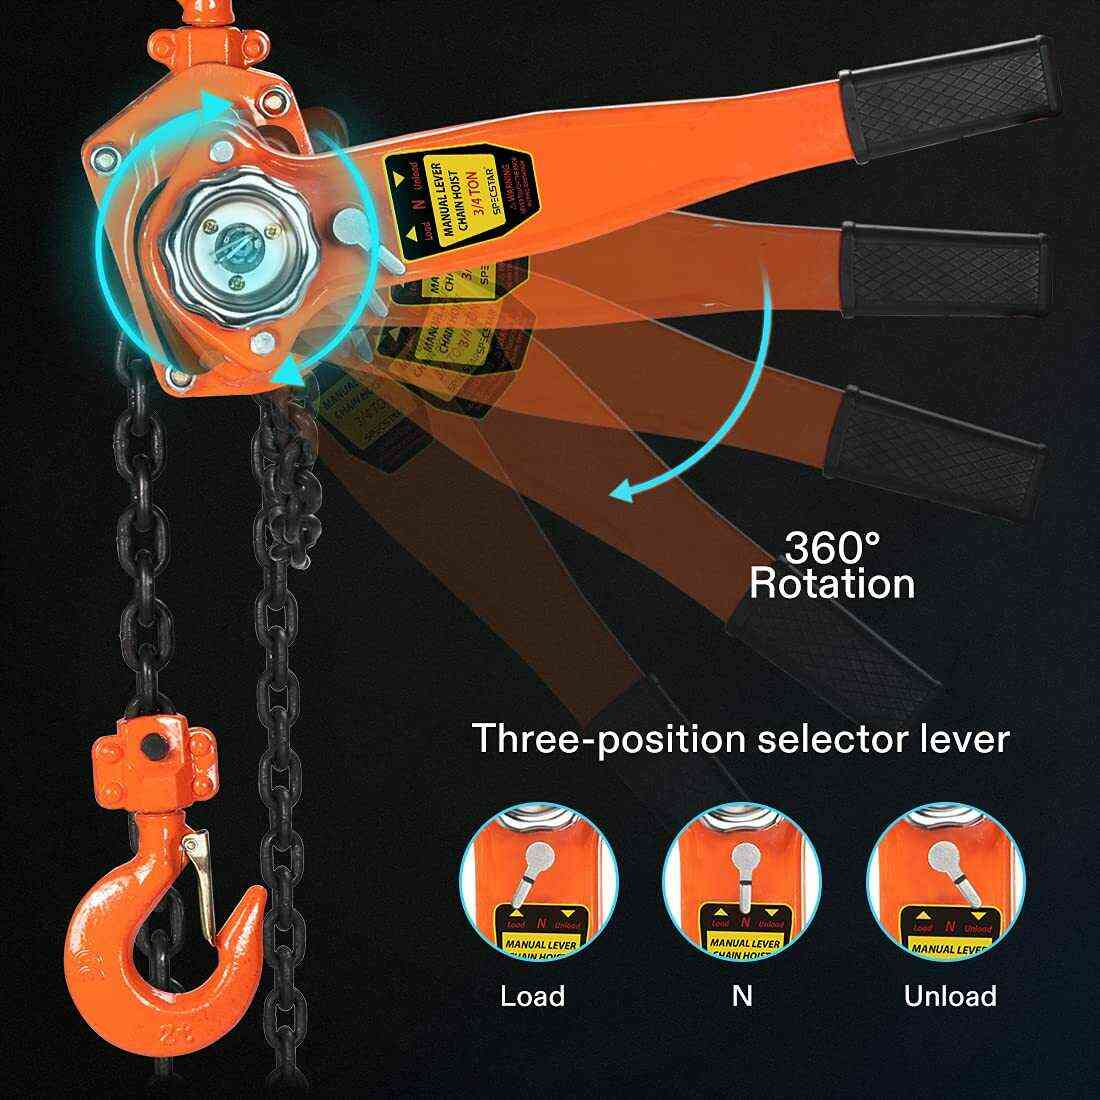 SPECSTAR Lever Chain Hoist with 2 Heavy Duty Hooks